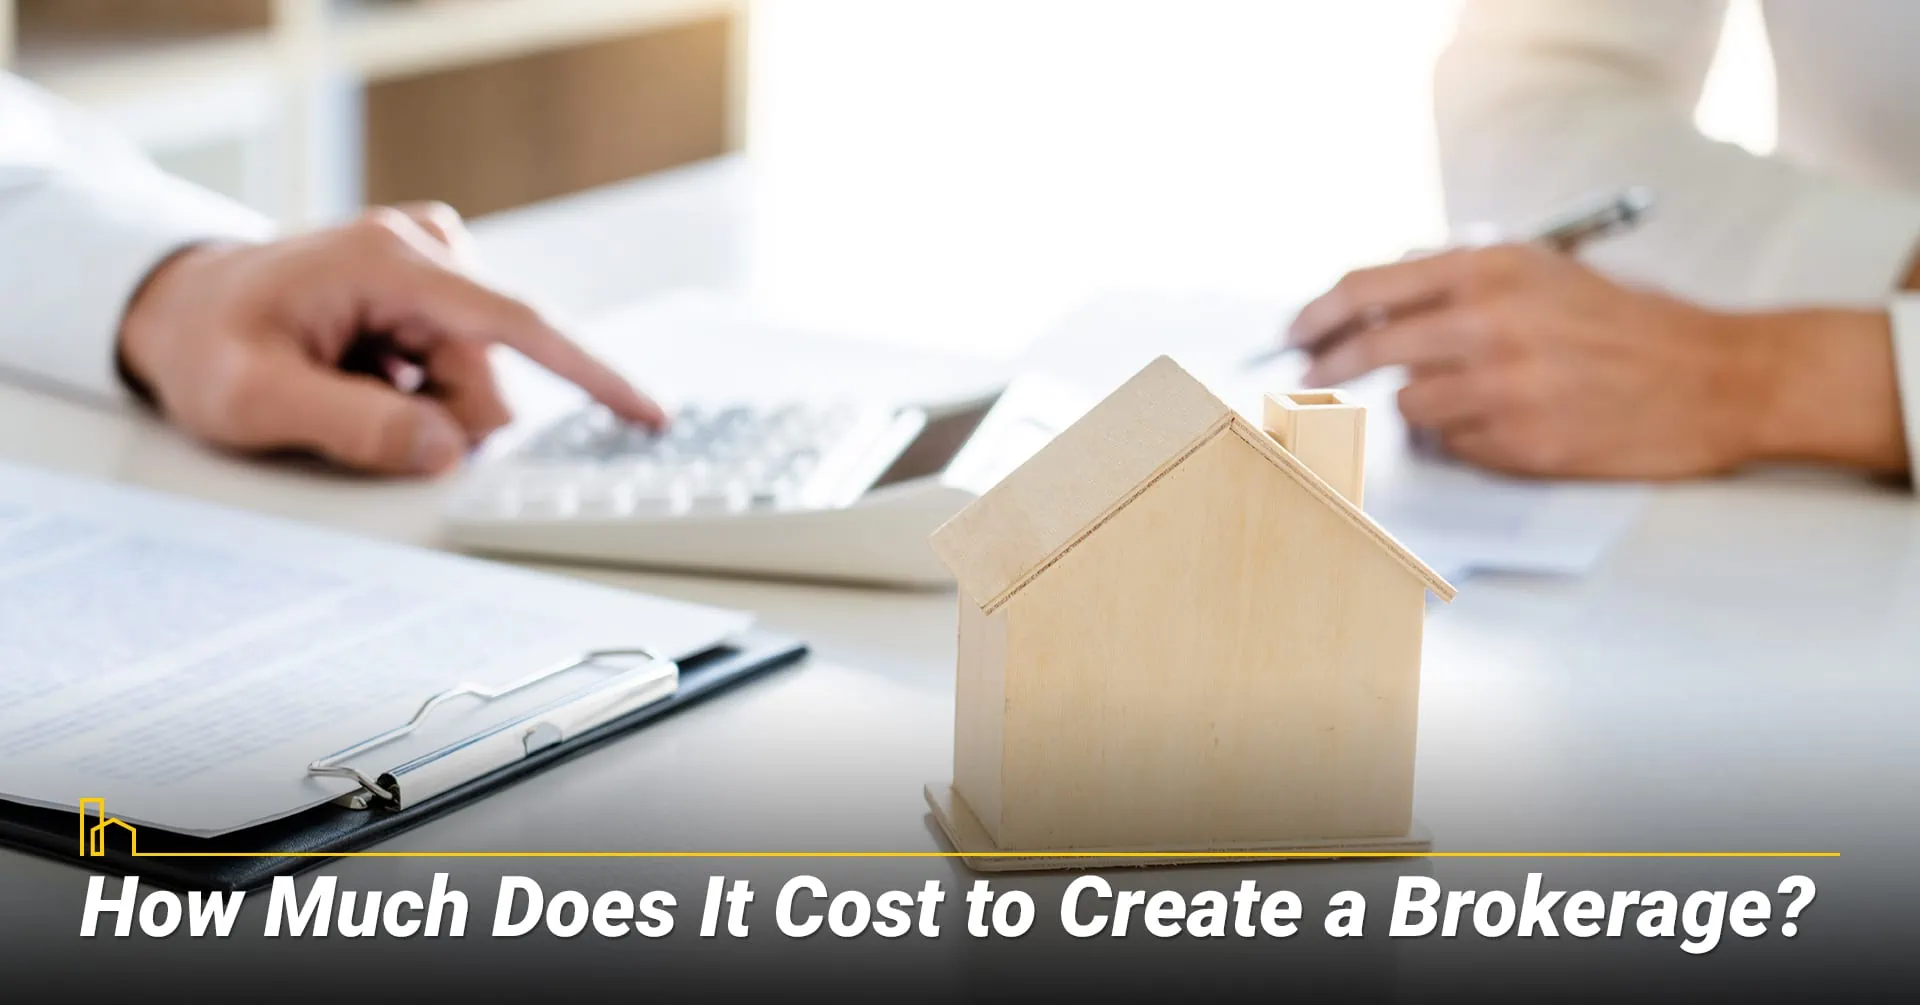 How Much Does It Cost to Create a Brokerage?